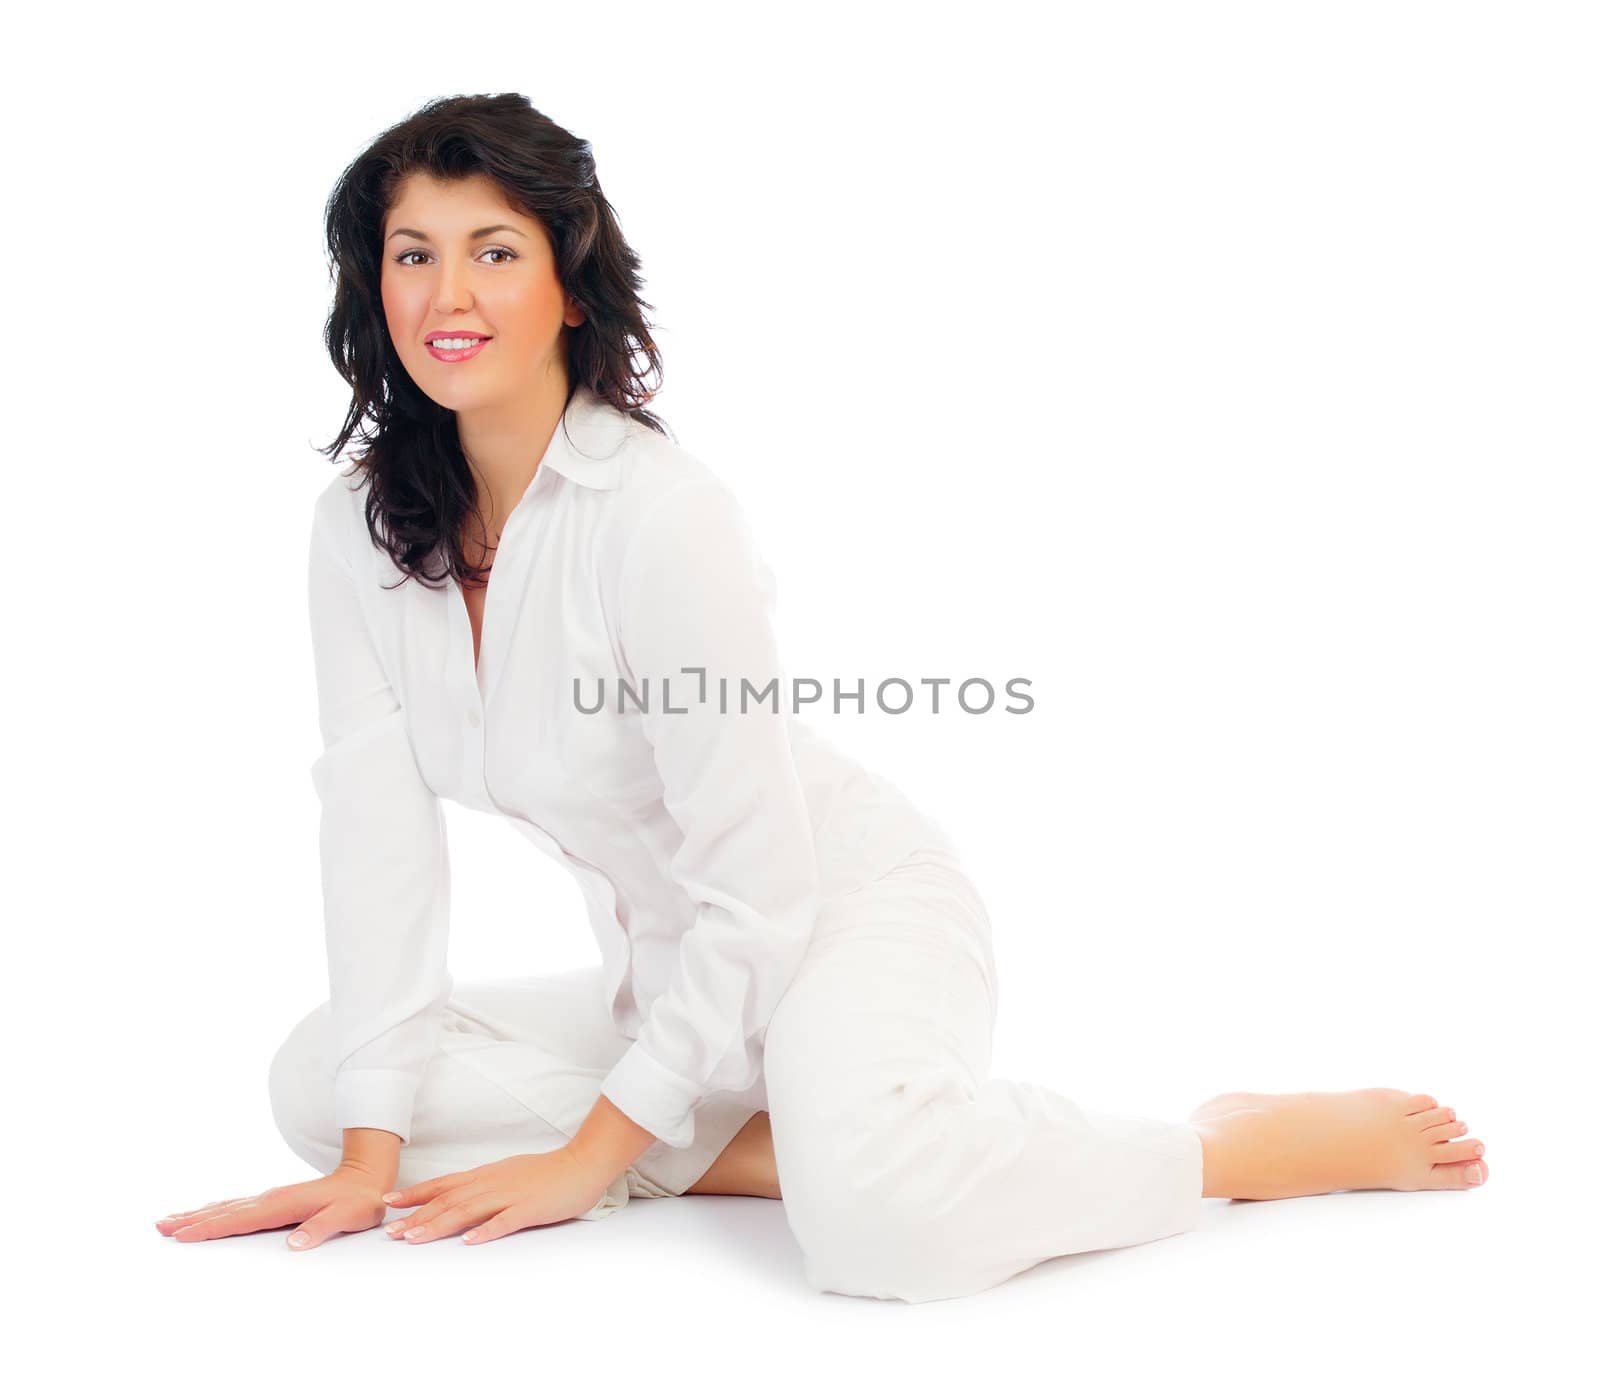 Young smiling woman sitting on floor isolated